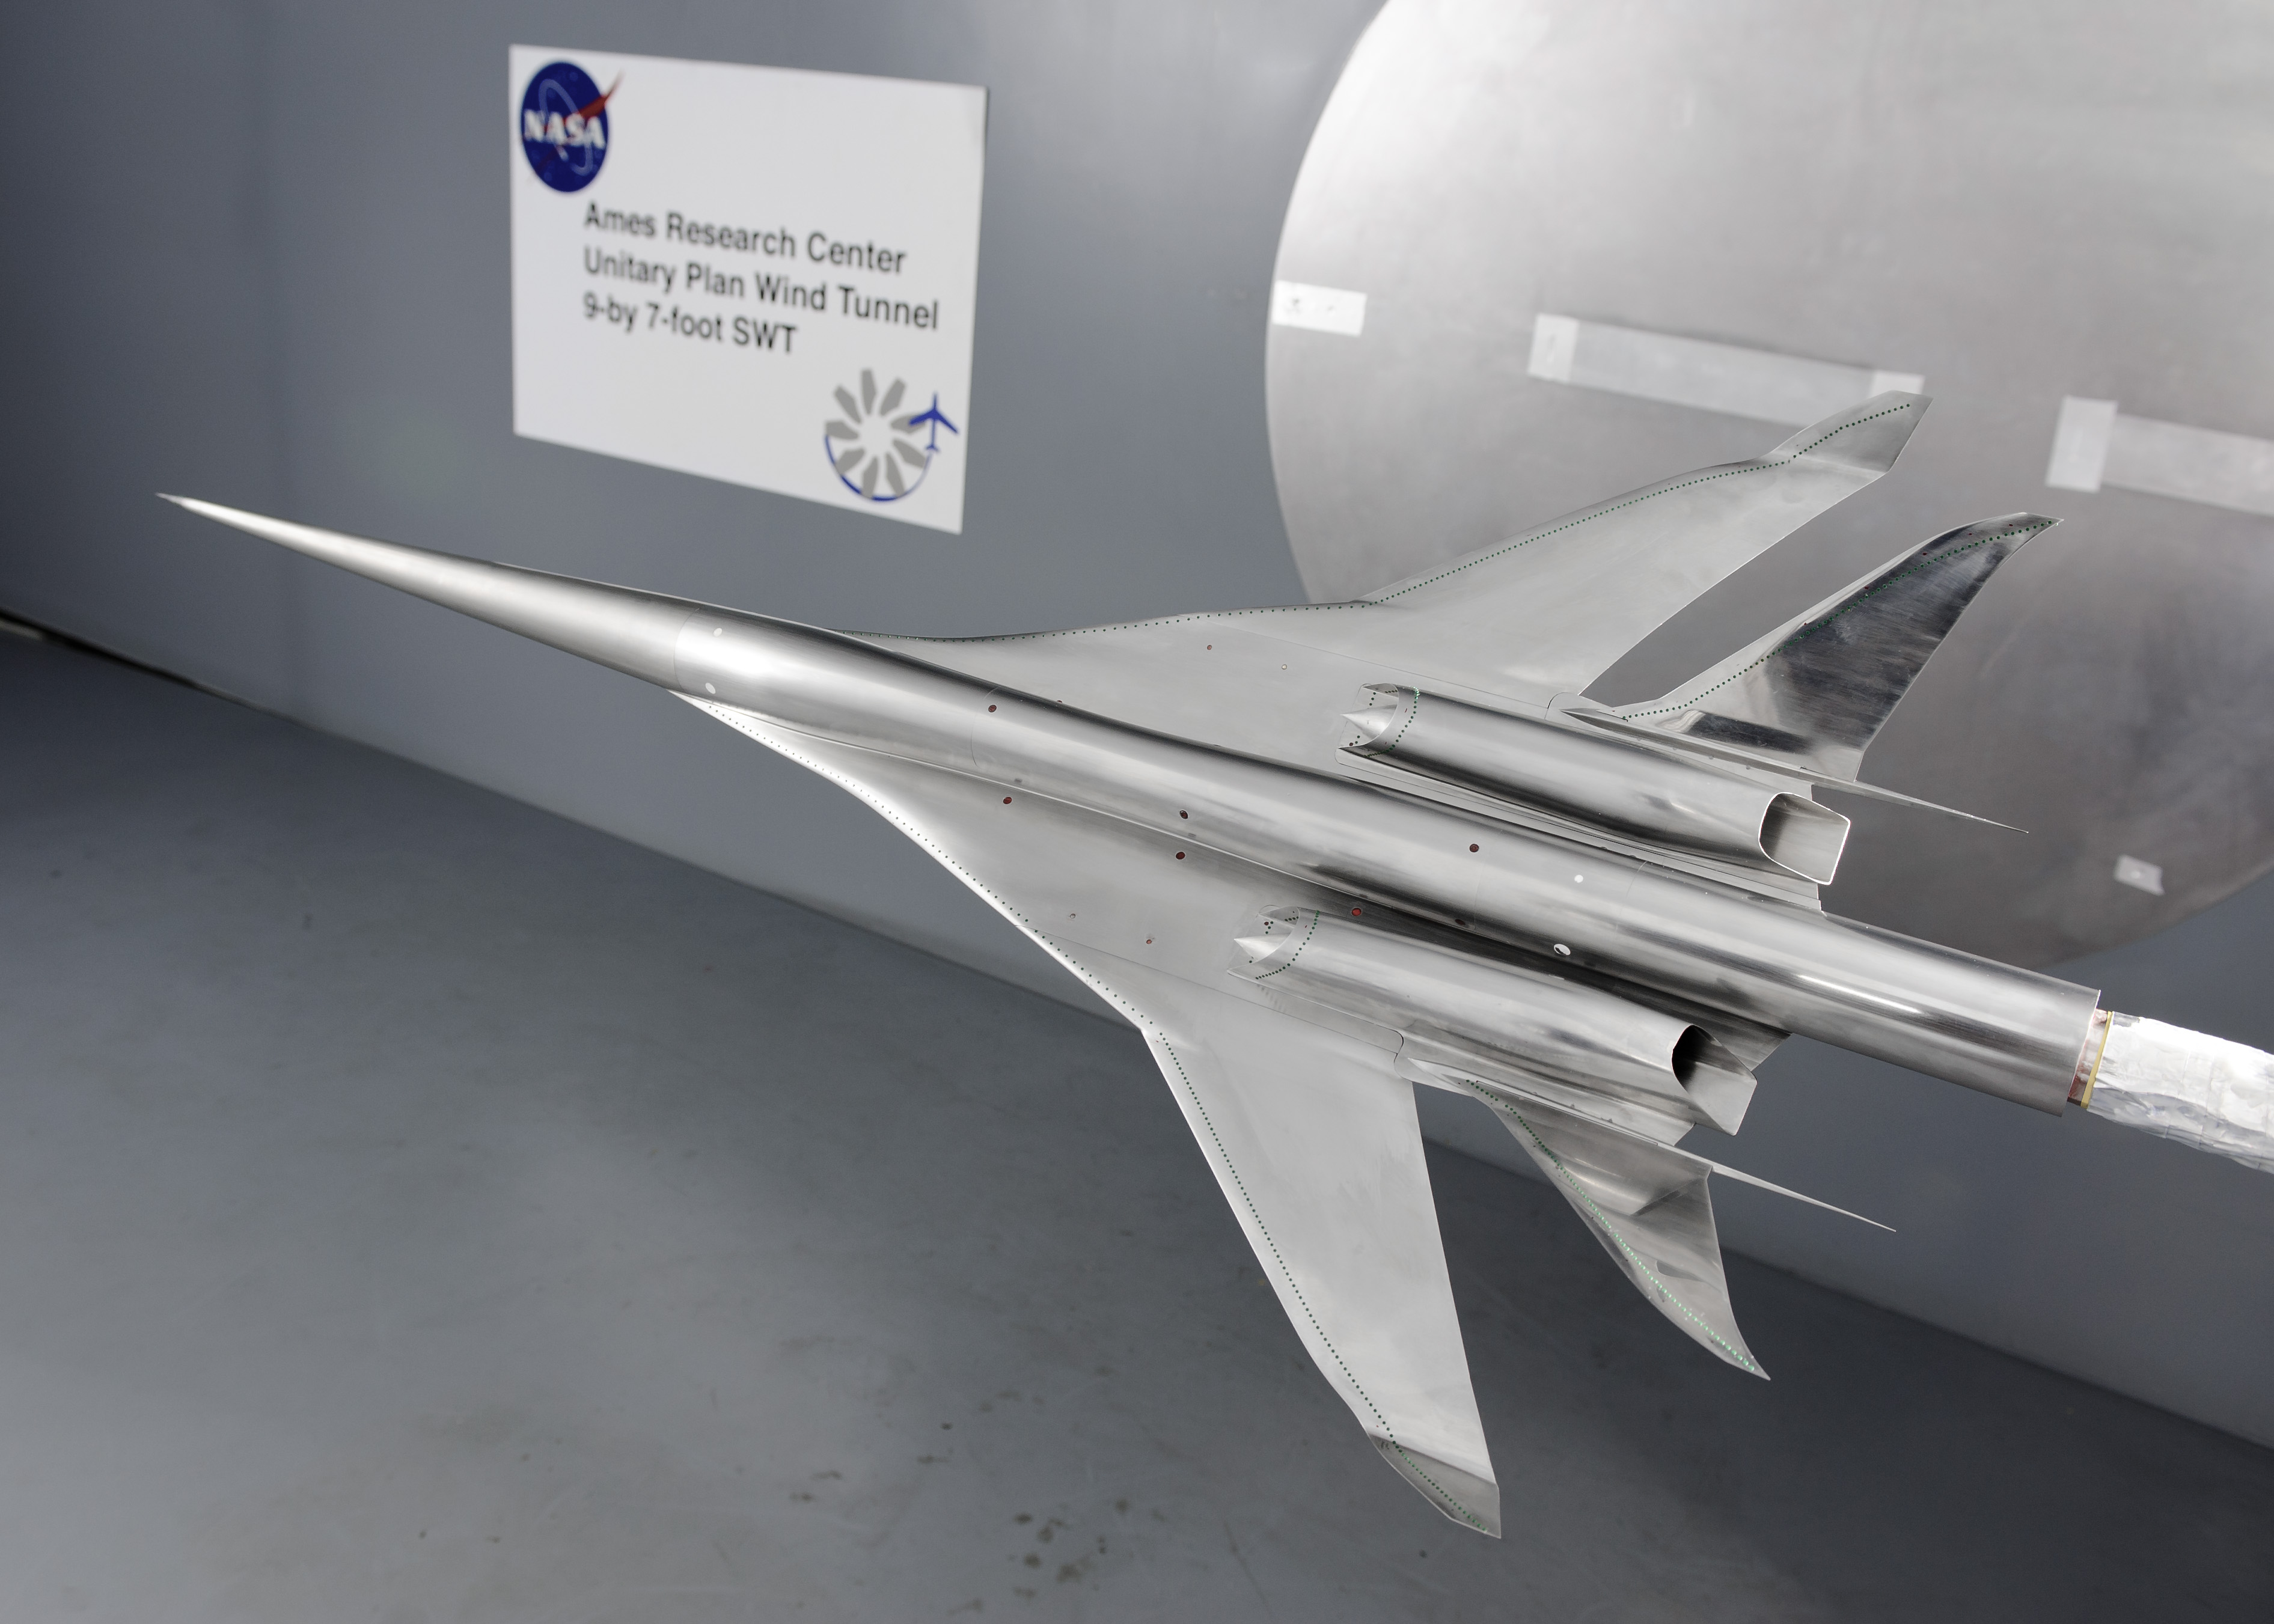 Tests of scale models like this one in a supersonic wind tunnel at NASA's Ames Research Center help researchers understand the forces acting on the aircraft that create sonic booms.